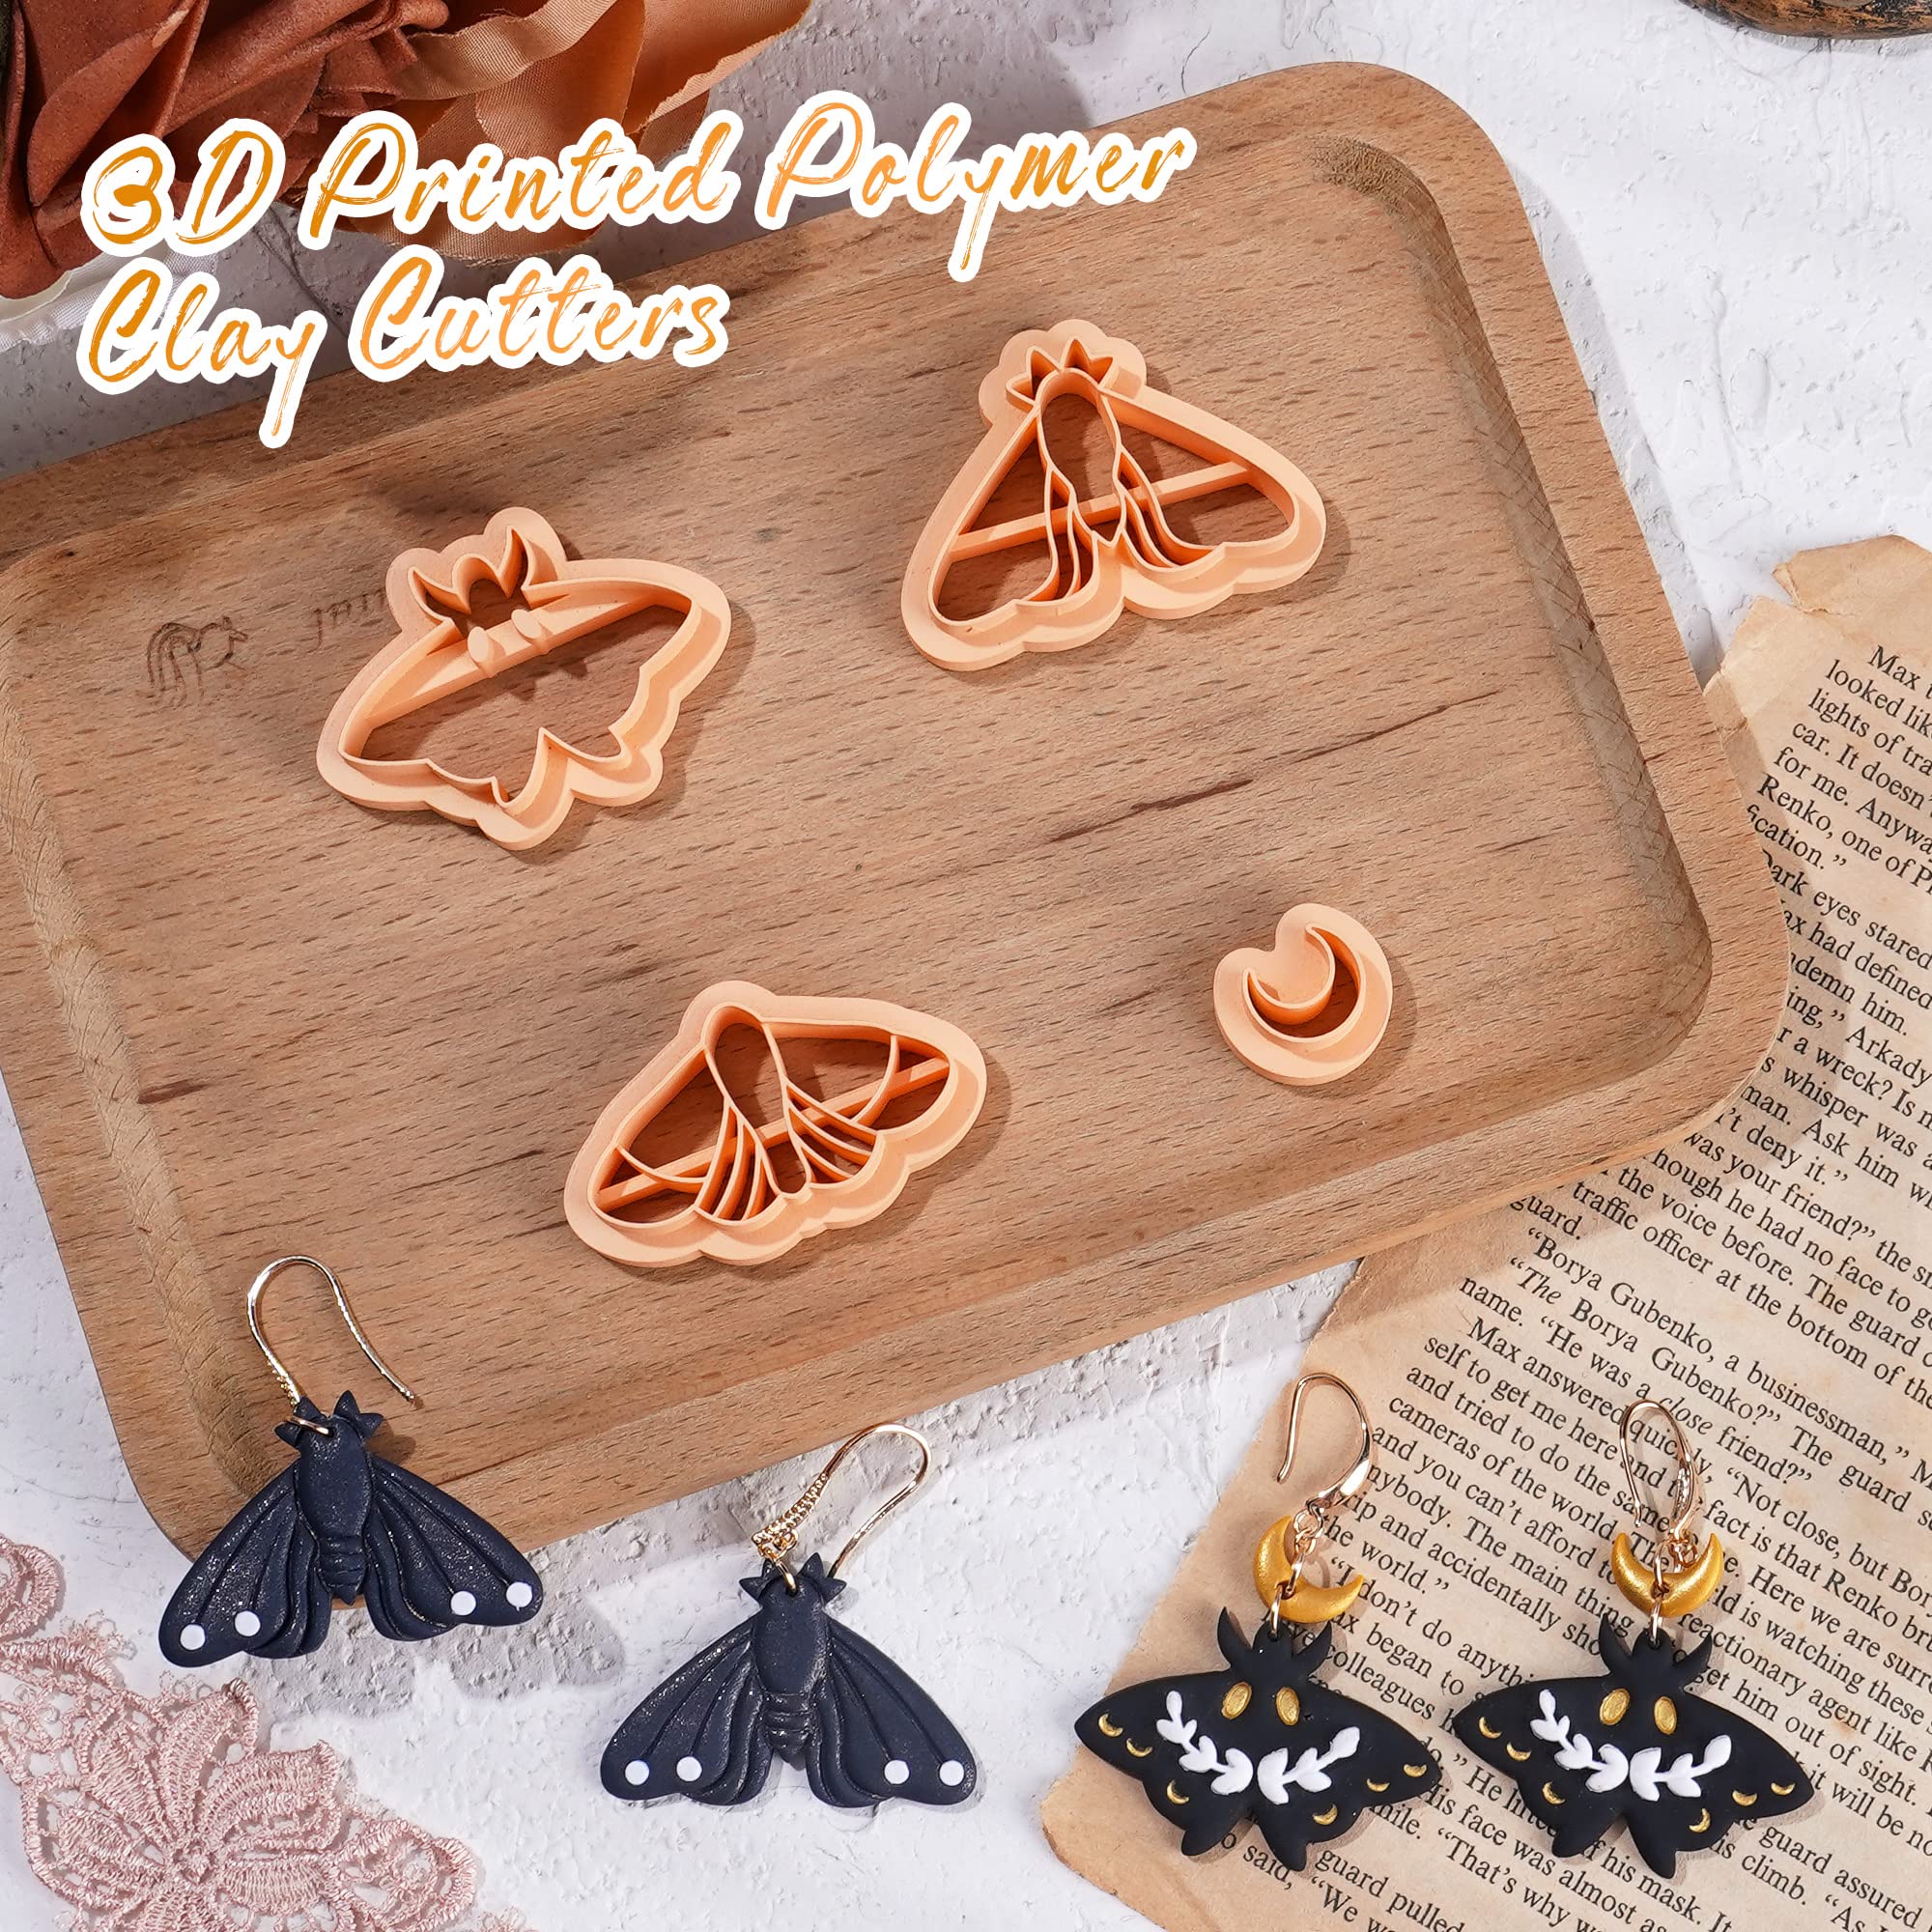 Puocaon 70s Valentines Clay Cutters 10 Pcs